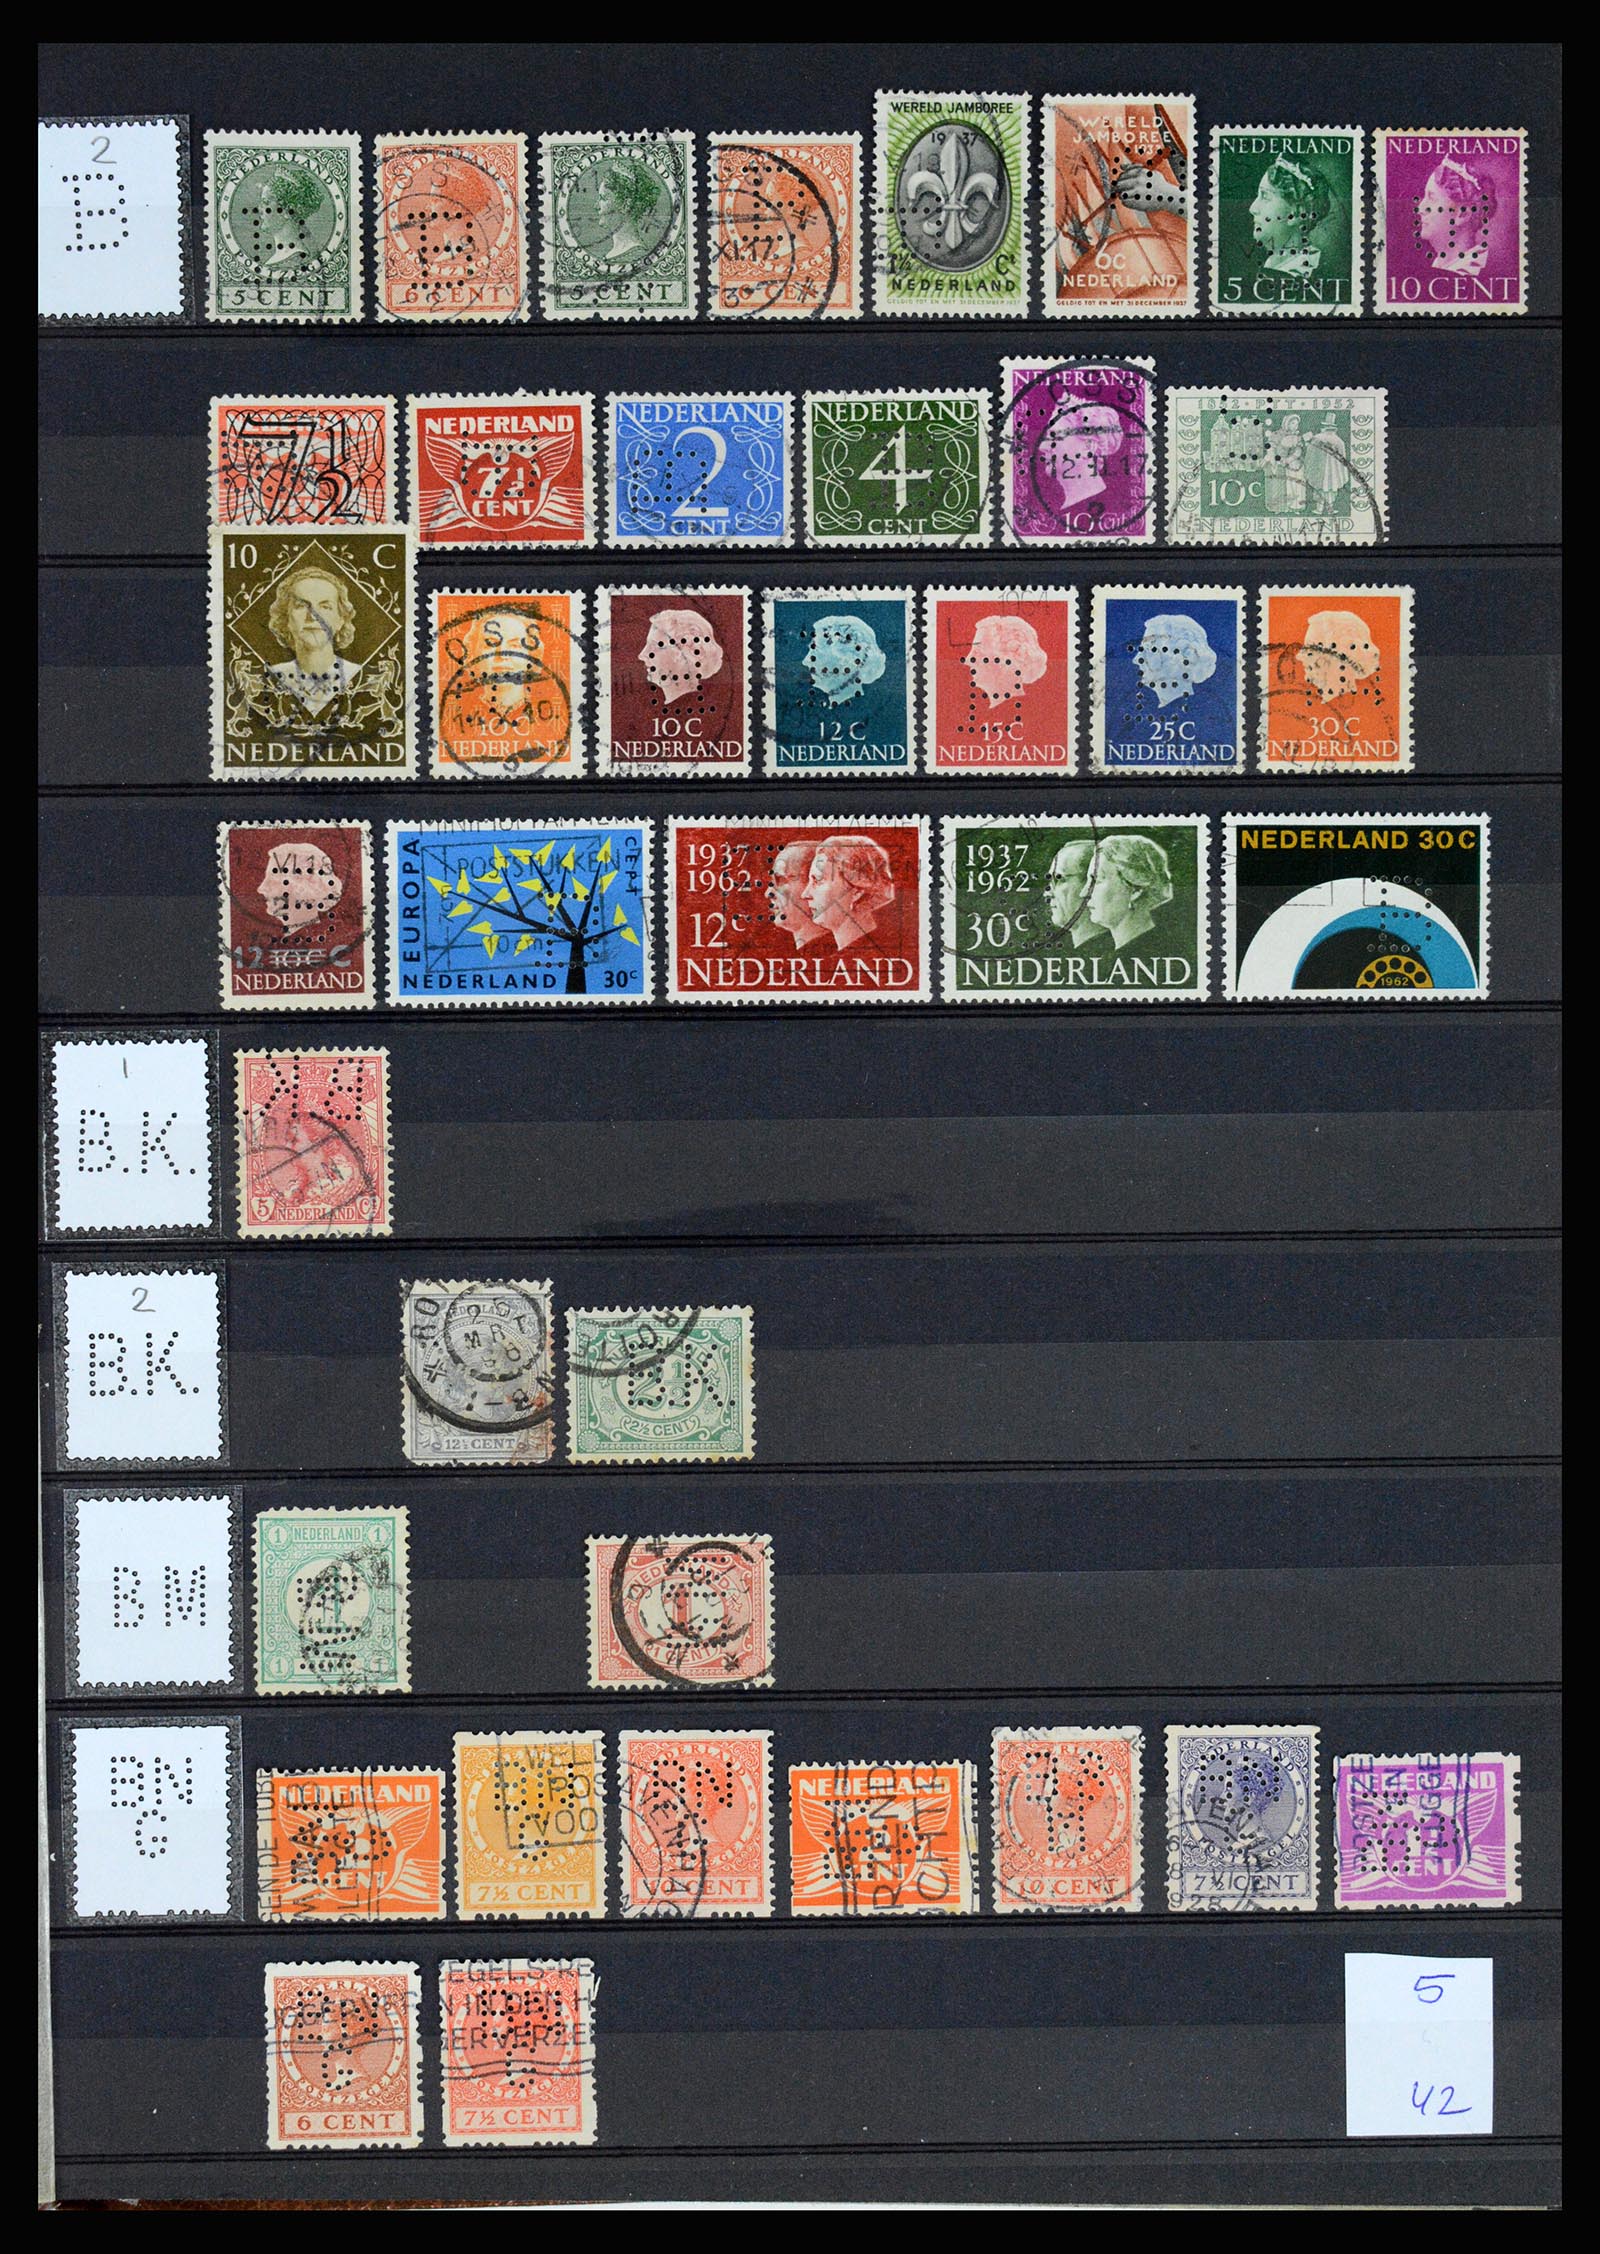 37183 004 - Stamp collection 37183 Netherlands perfins 1872-1960.